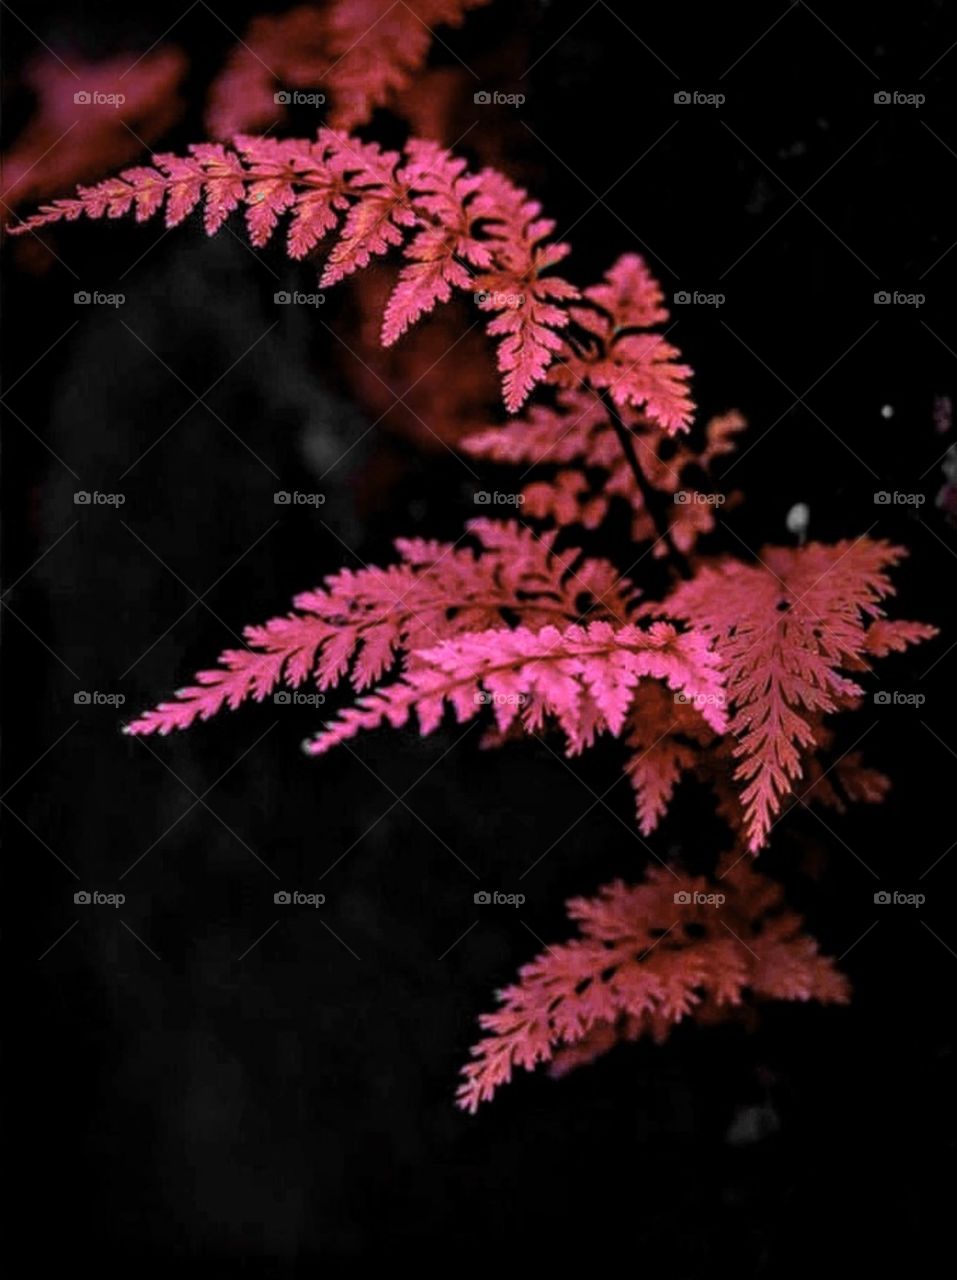 Reddish colored fern, I love it 🤗.  Ferns are everywhere they had it's own style.